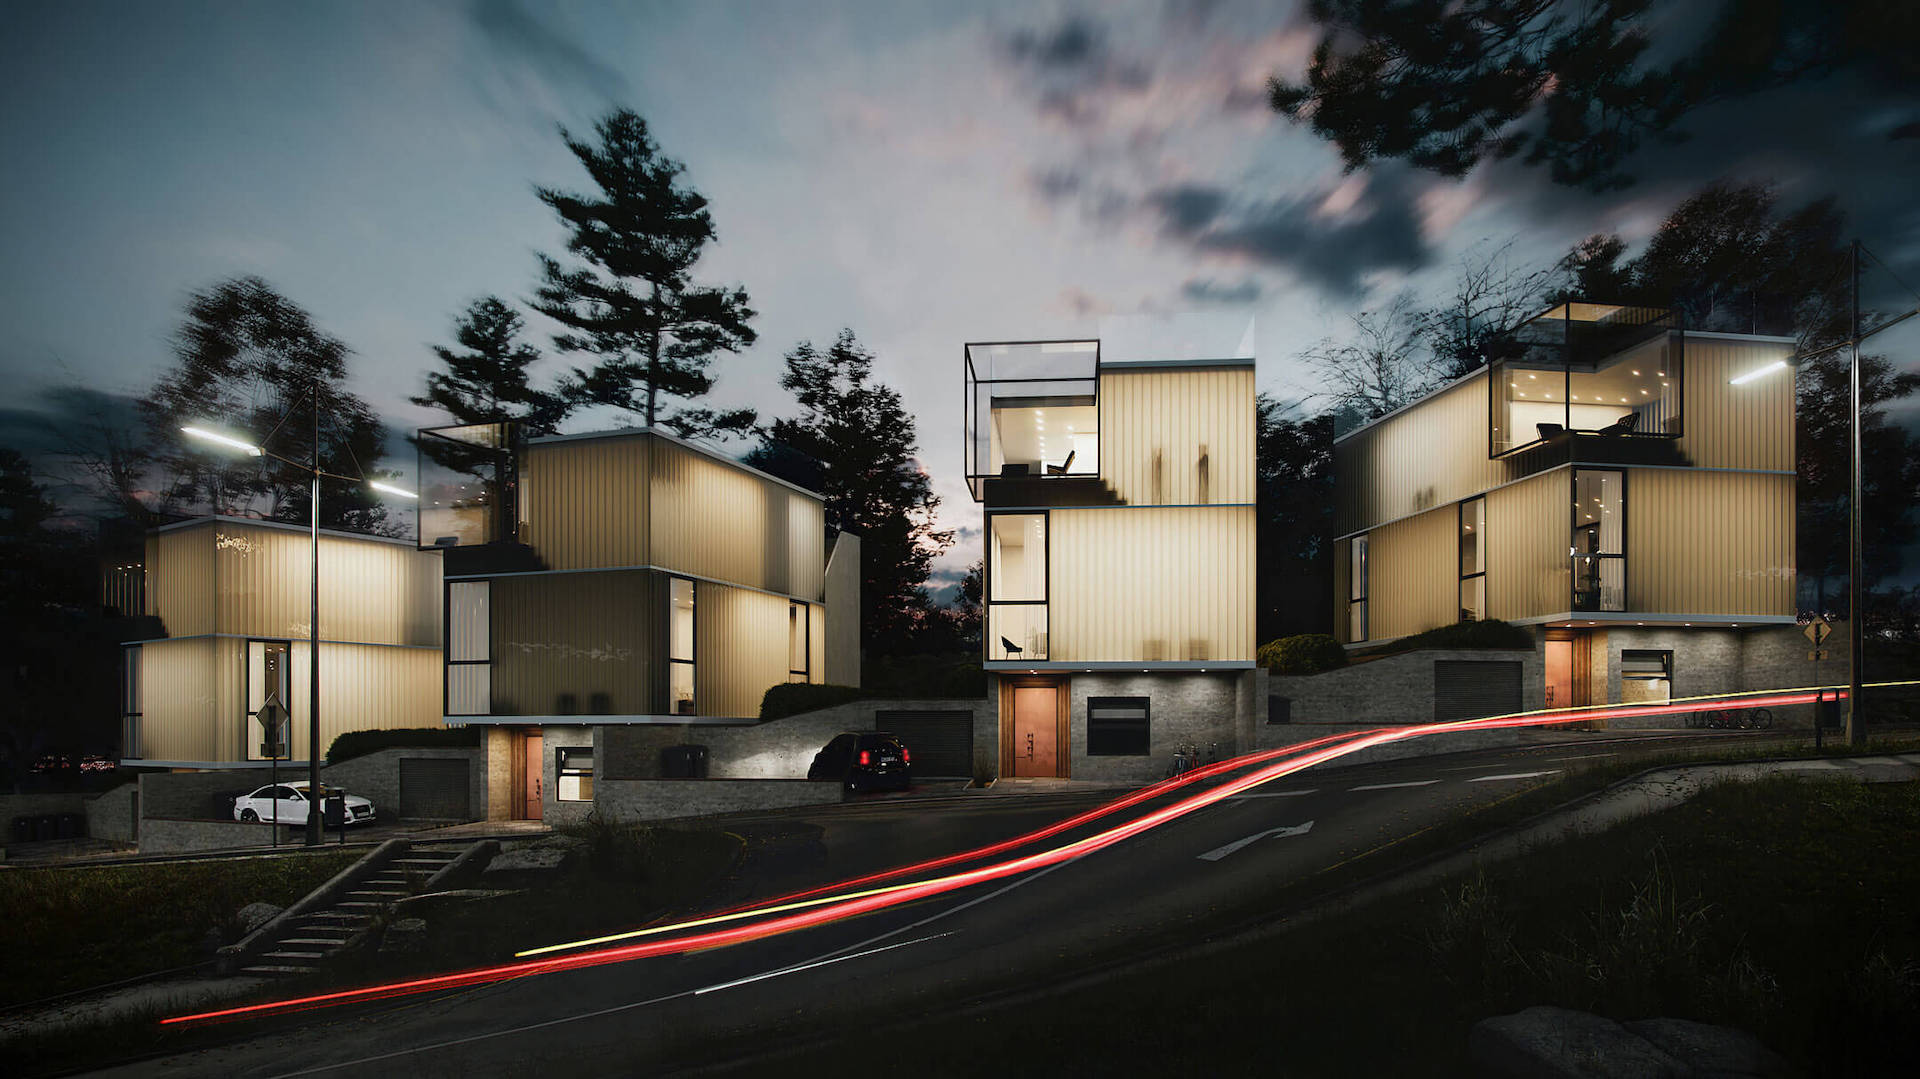 Nighttime Architectural 3D Rendering of a Residential Complex